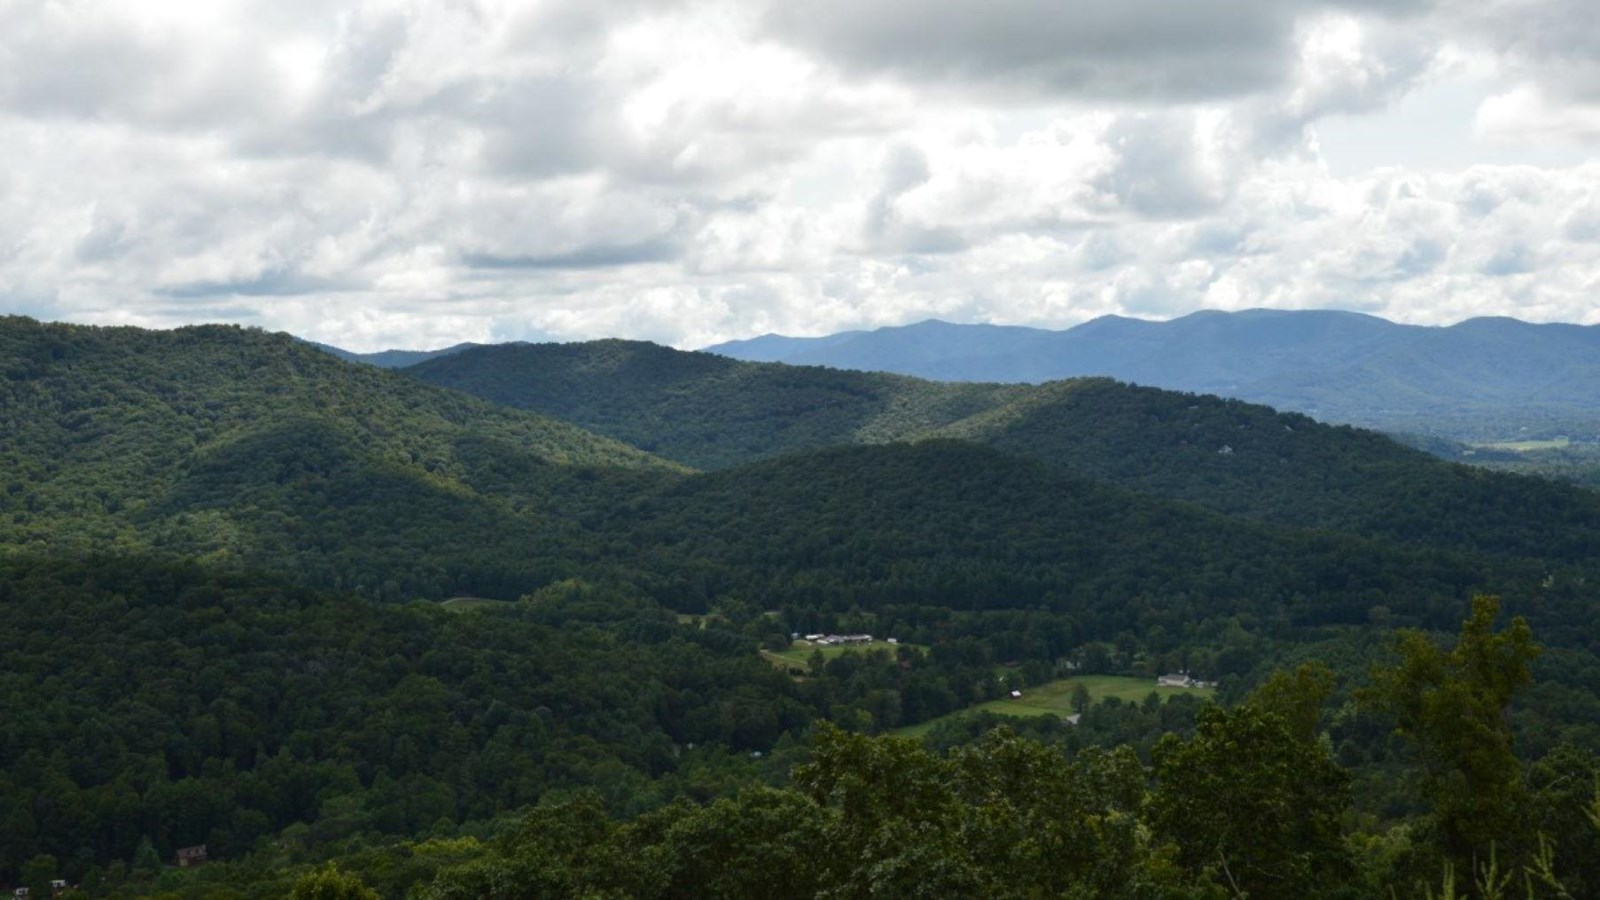 Forested valley spans out across the foreground with layered mountains in the distance